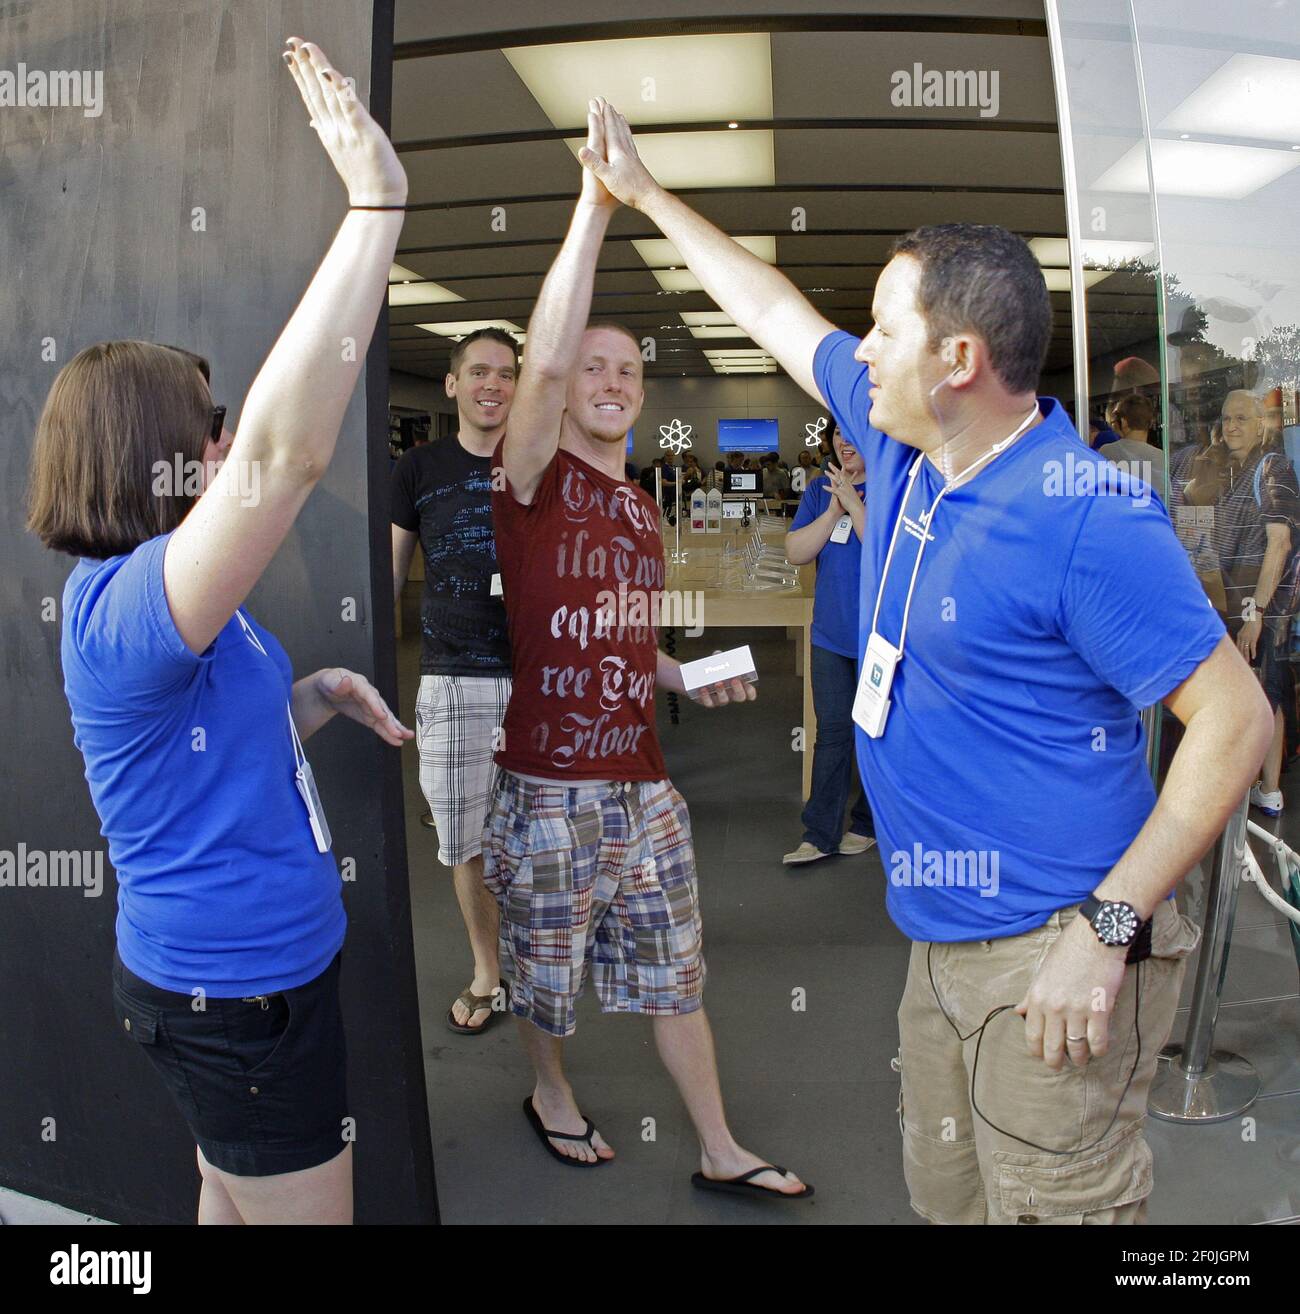 It only took ten minutes for Cody Lusby, foreground center, and friend Justin Franklin (rear, both from Saginaw) to be the first out of the door with their new iPhone 4Gs as they high five Apple Store staff at University Village in Fort Worth, Texas, Thursday, June 24, 2010. (Photo by Paul Moseley/Fort Worth Star-Telegram/MCT/Sipa USA) Stock Photo